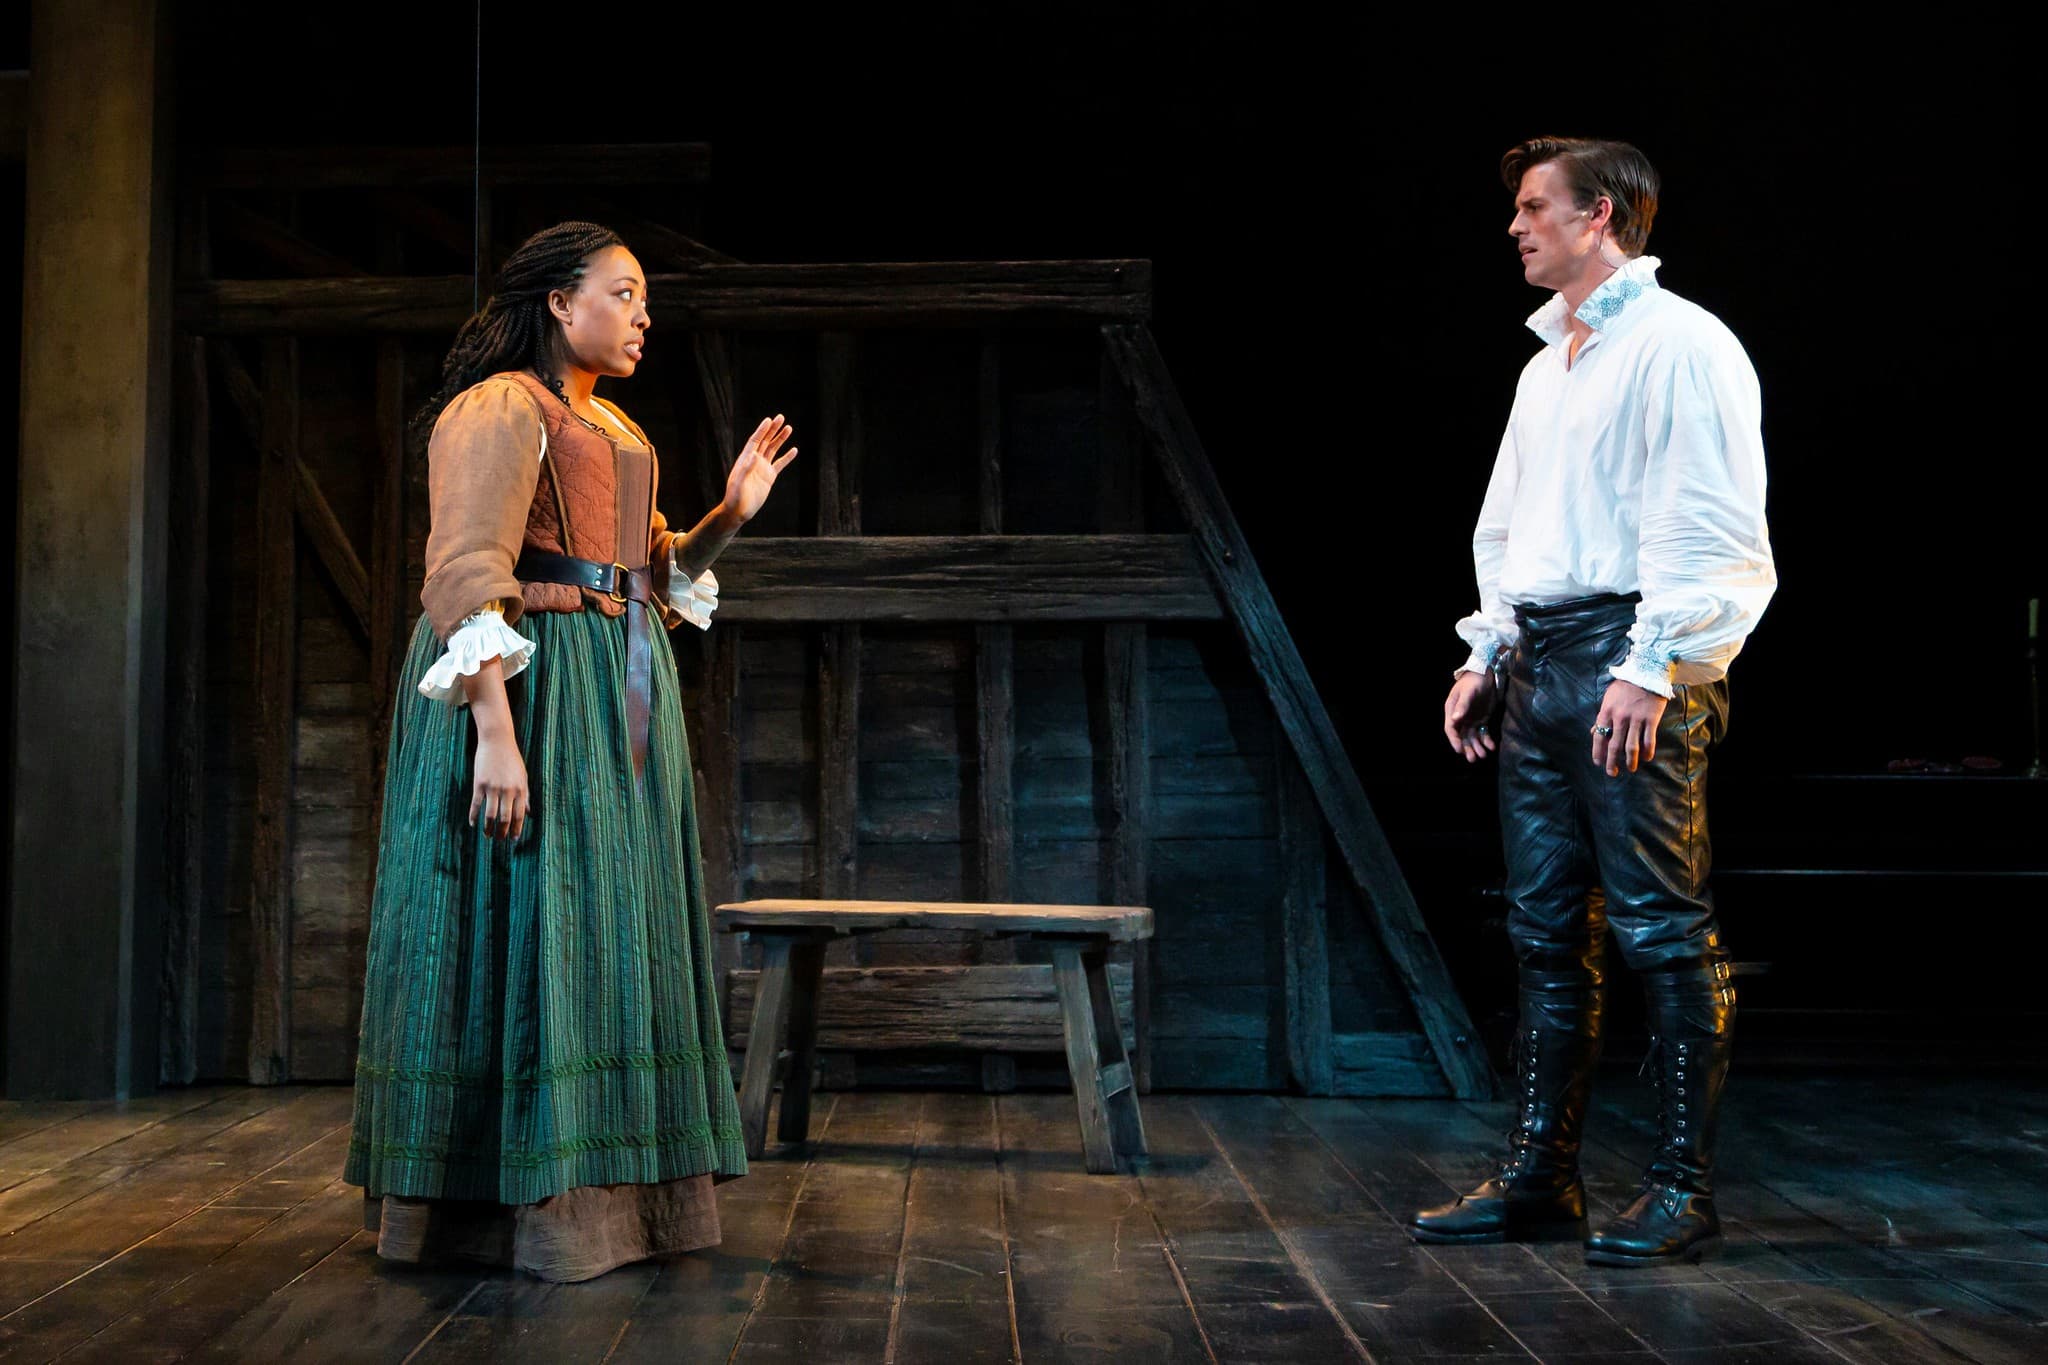 Lynsday Allyn Cox and Michael Underhill in the Huntington’s production of "Witch." (Courtesy T Charles Erickson)